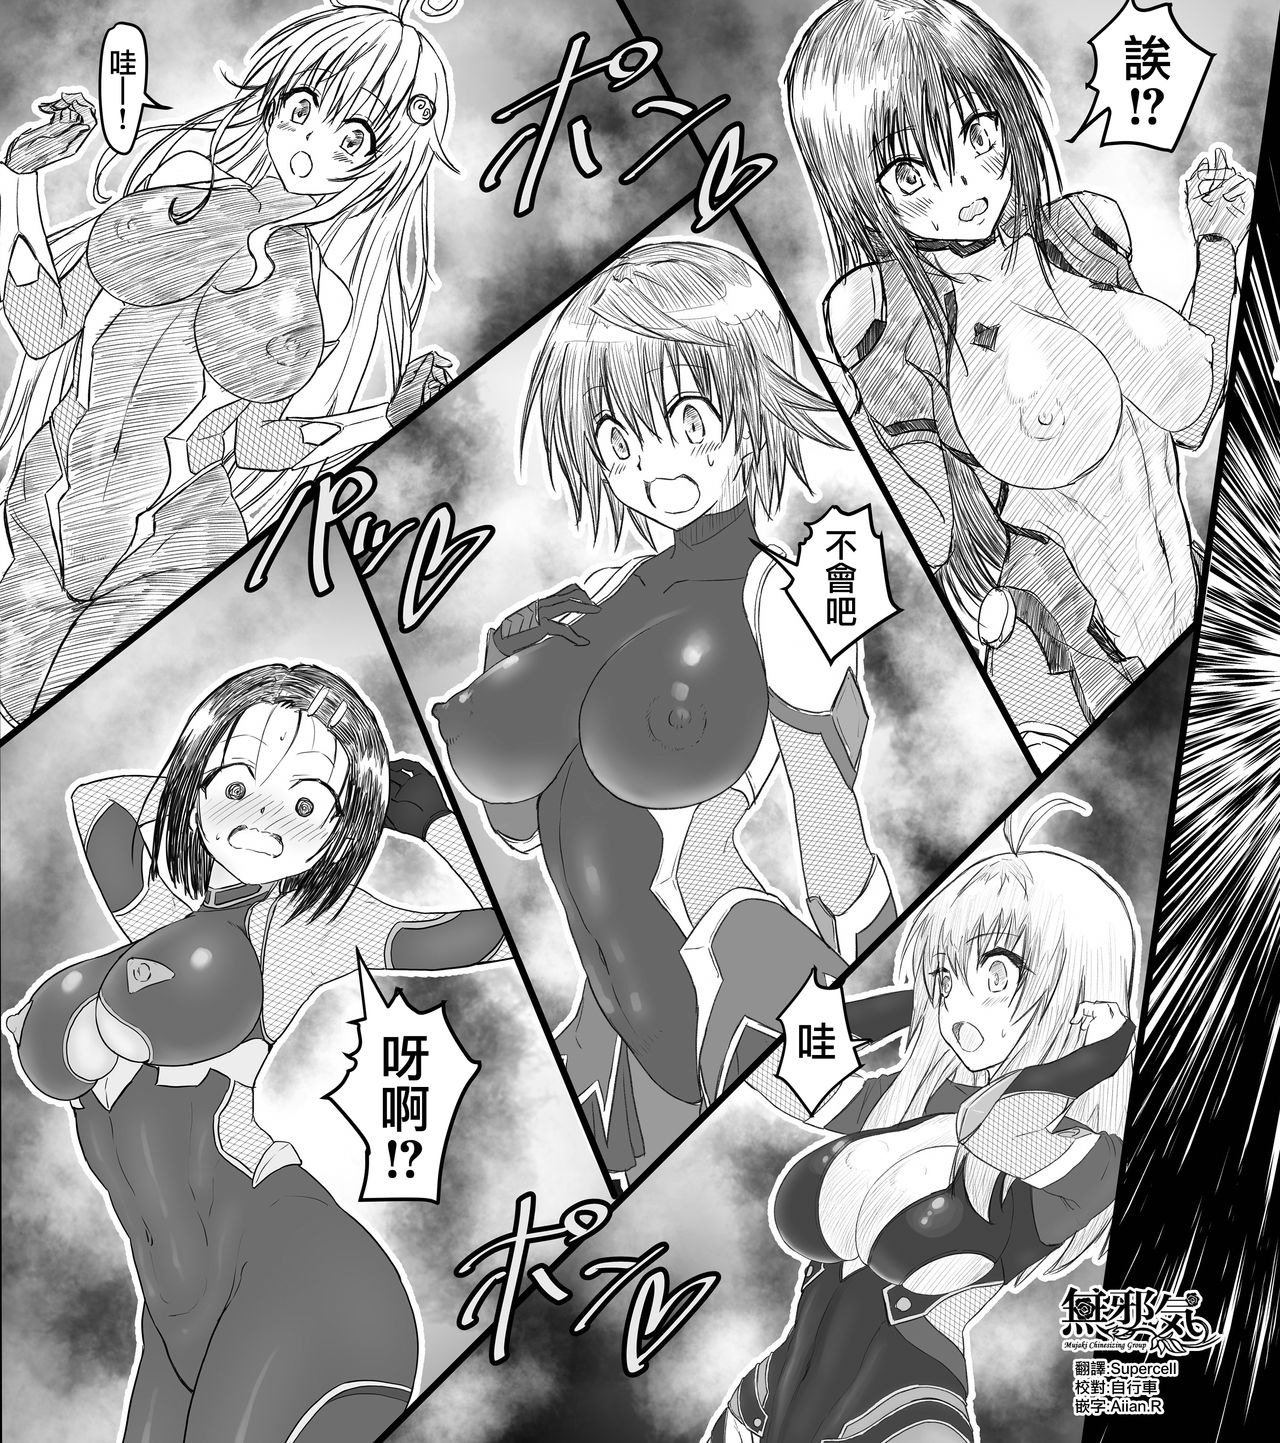 [Iwao] とらぶる対魔忍 (To LOVE-Ru) [Chinese] [無邪気漢化組] page 1 full